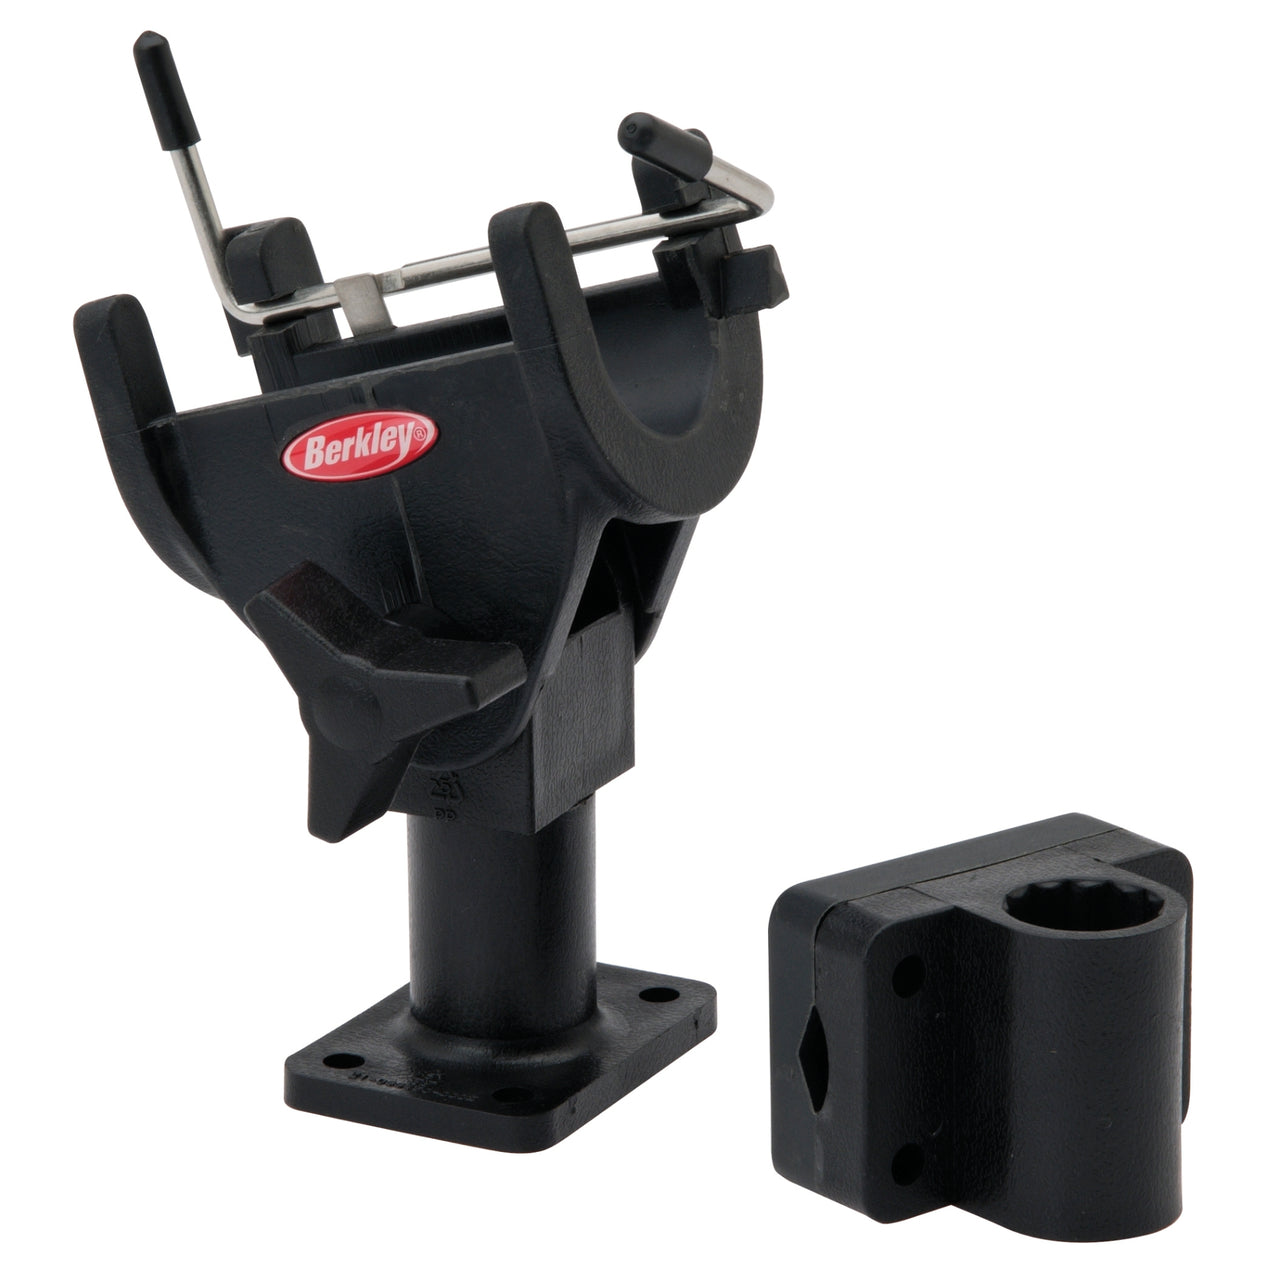 Rod Holders   - High quality production